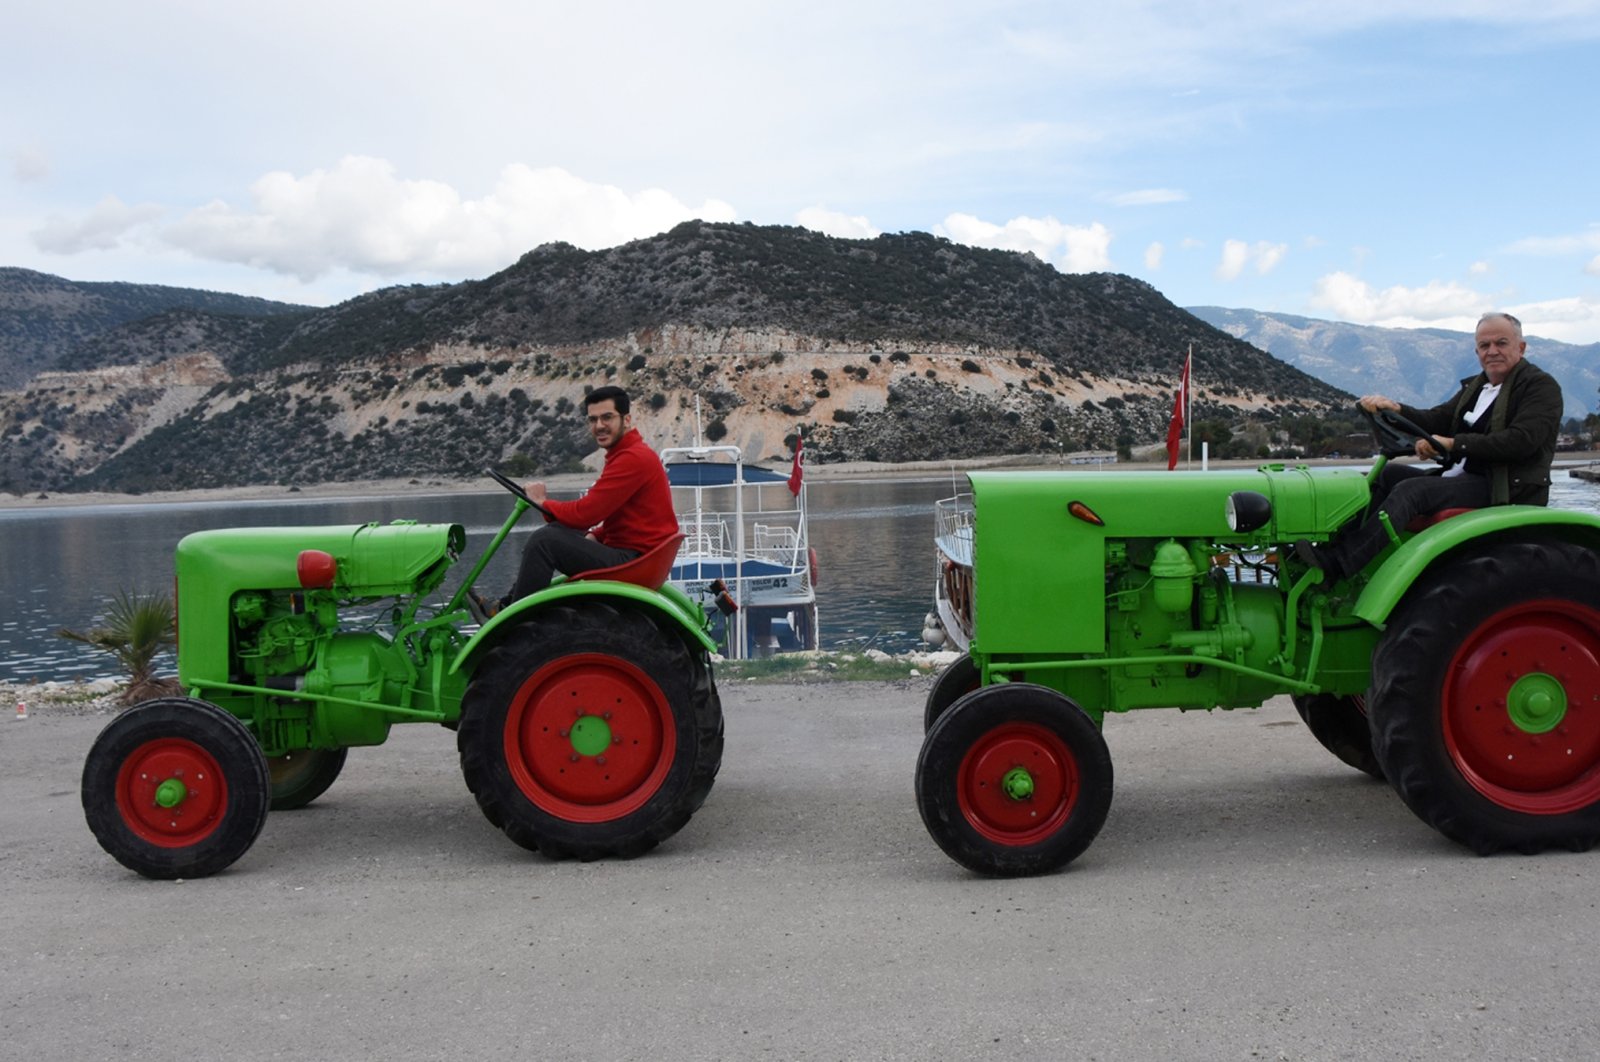 Mehmet Bayraktaroğlu and his son Hüseyin sitting on two fully restored and operational Fendt Dieselross brand tractors originally produced over 70 years ago, Antalya, southern Turkey, Dec. 20, 2021. (DHA Photo)